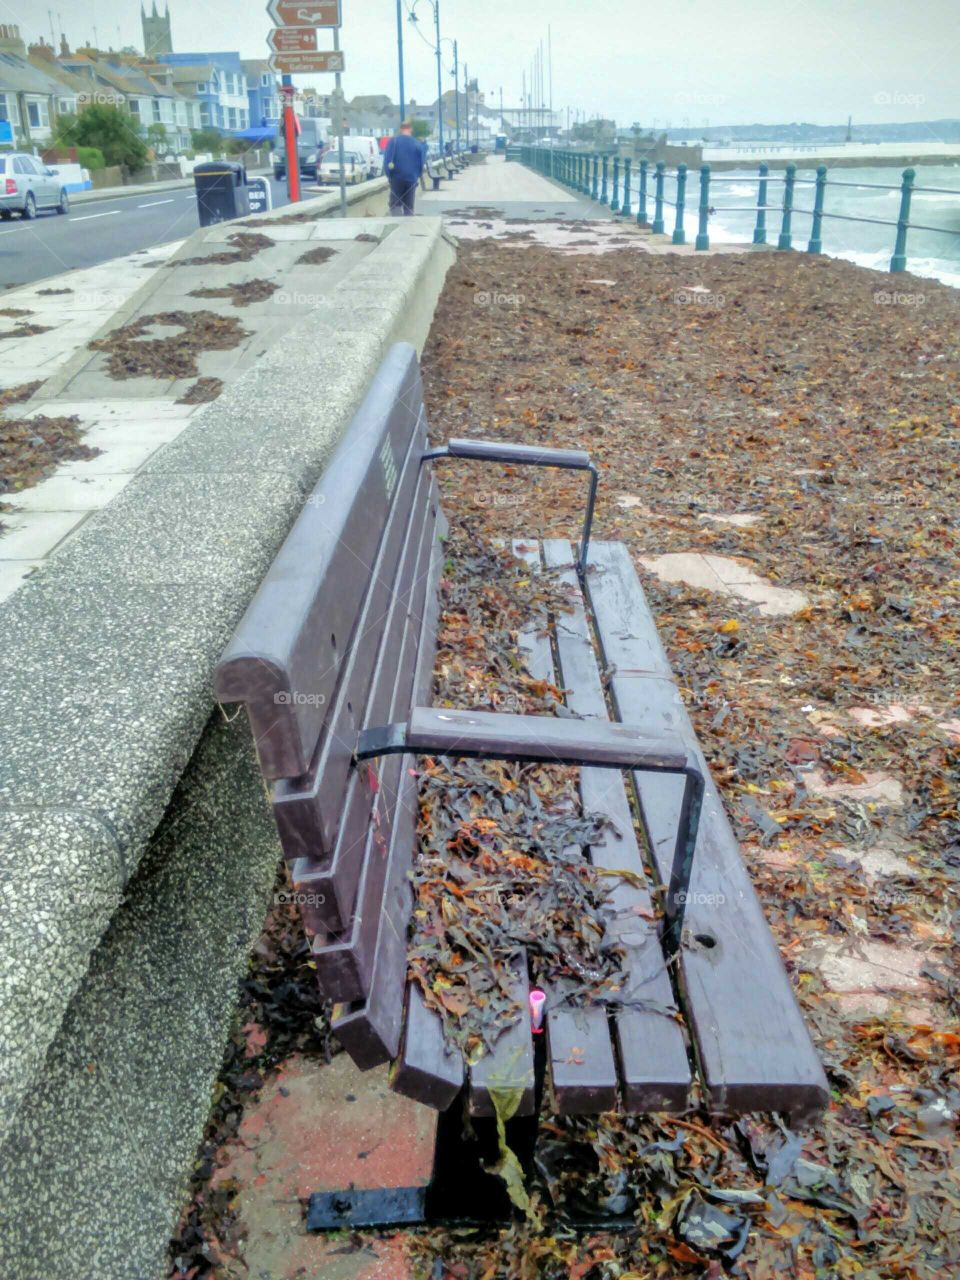 bench on Penzance promenade covers in seaweed after a winter storm